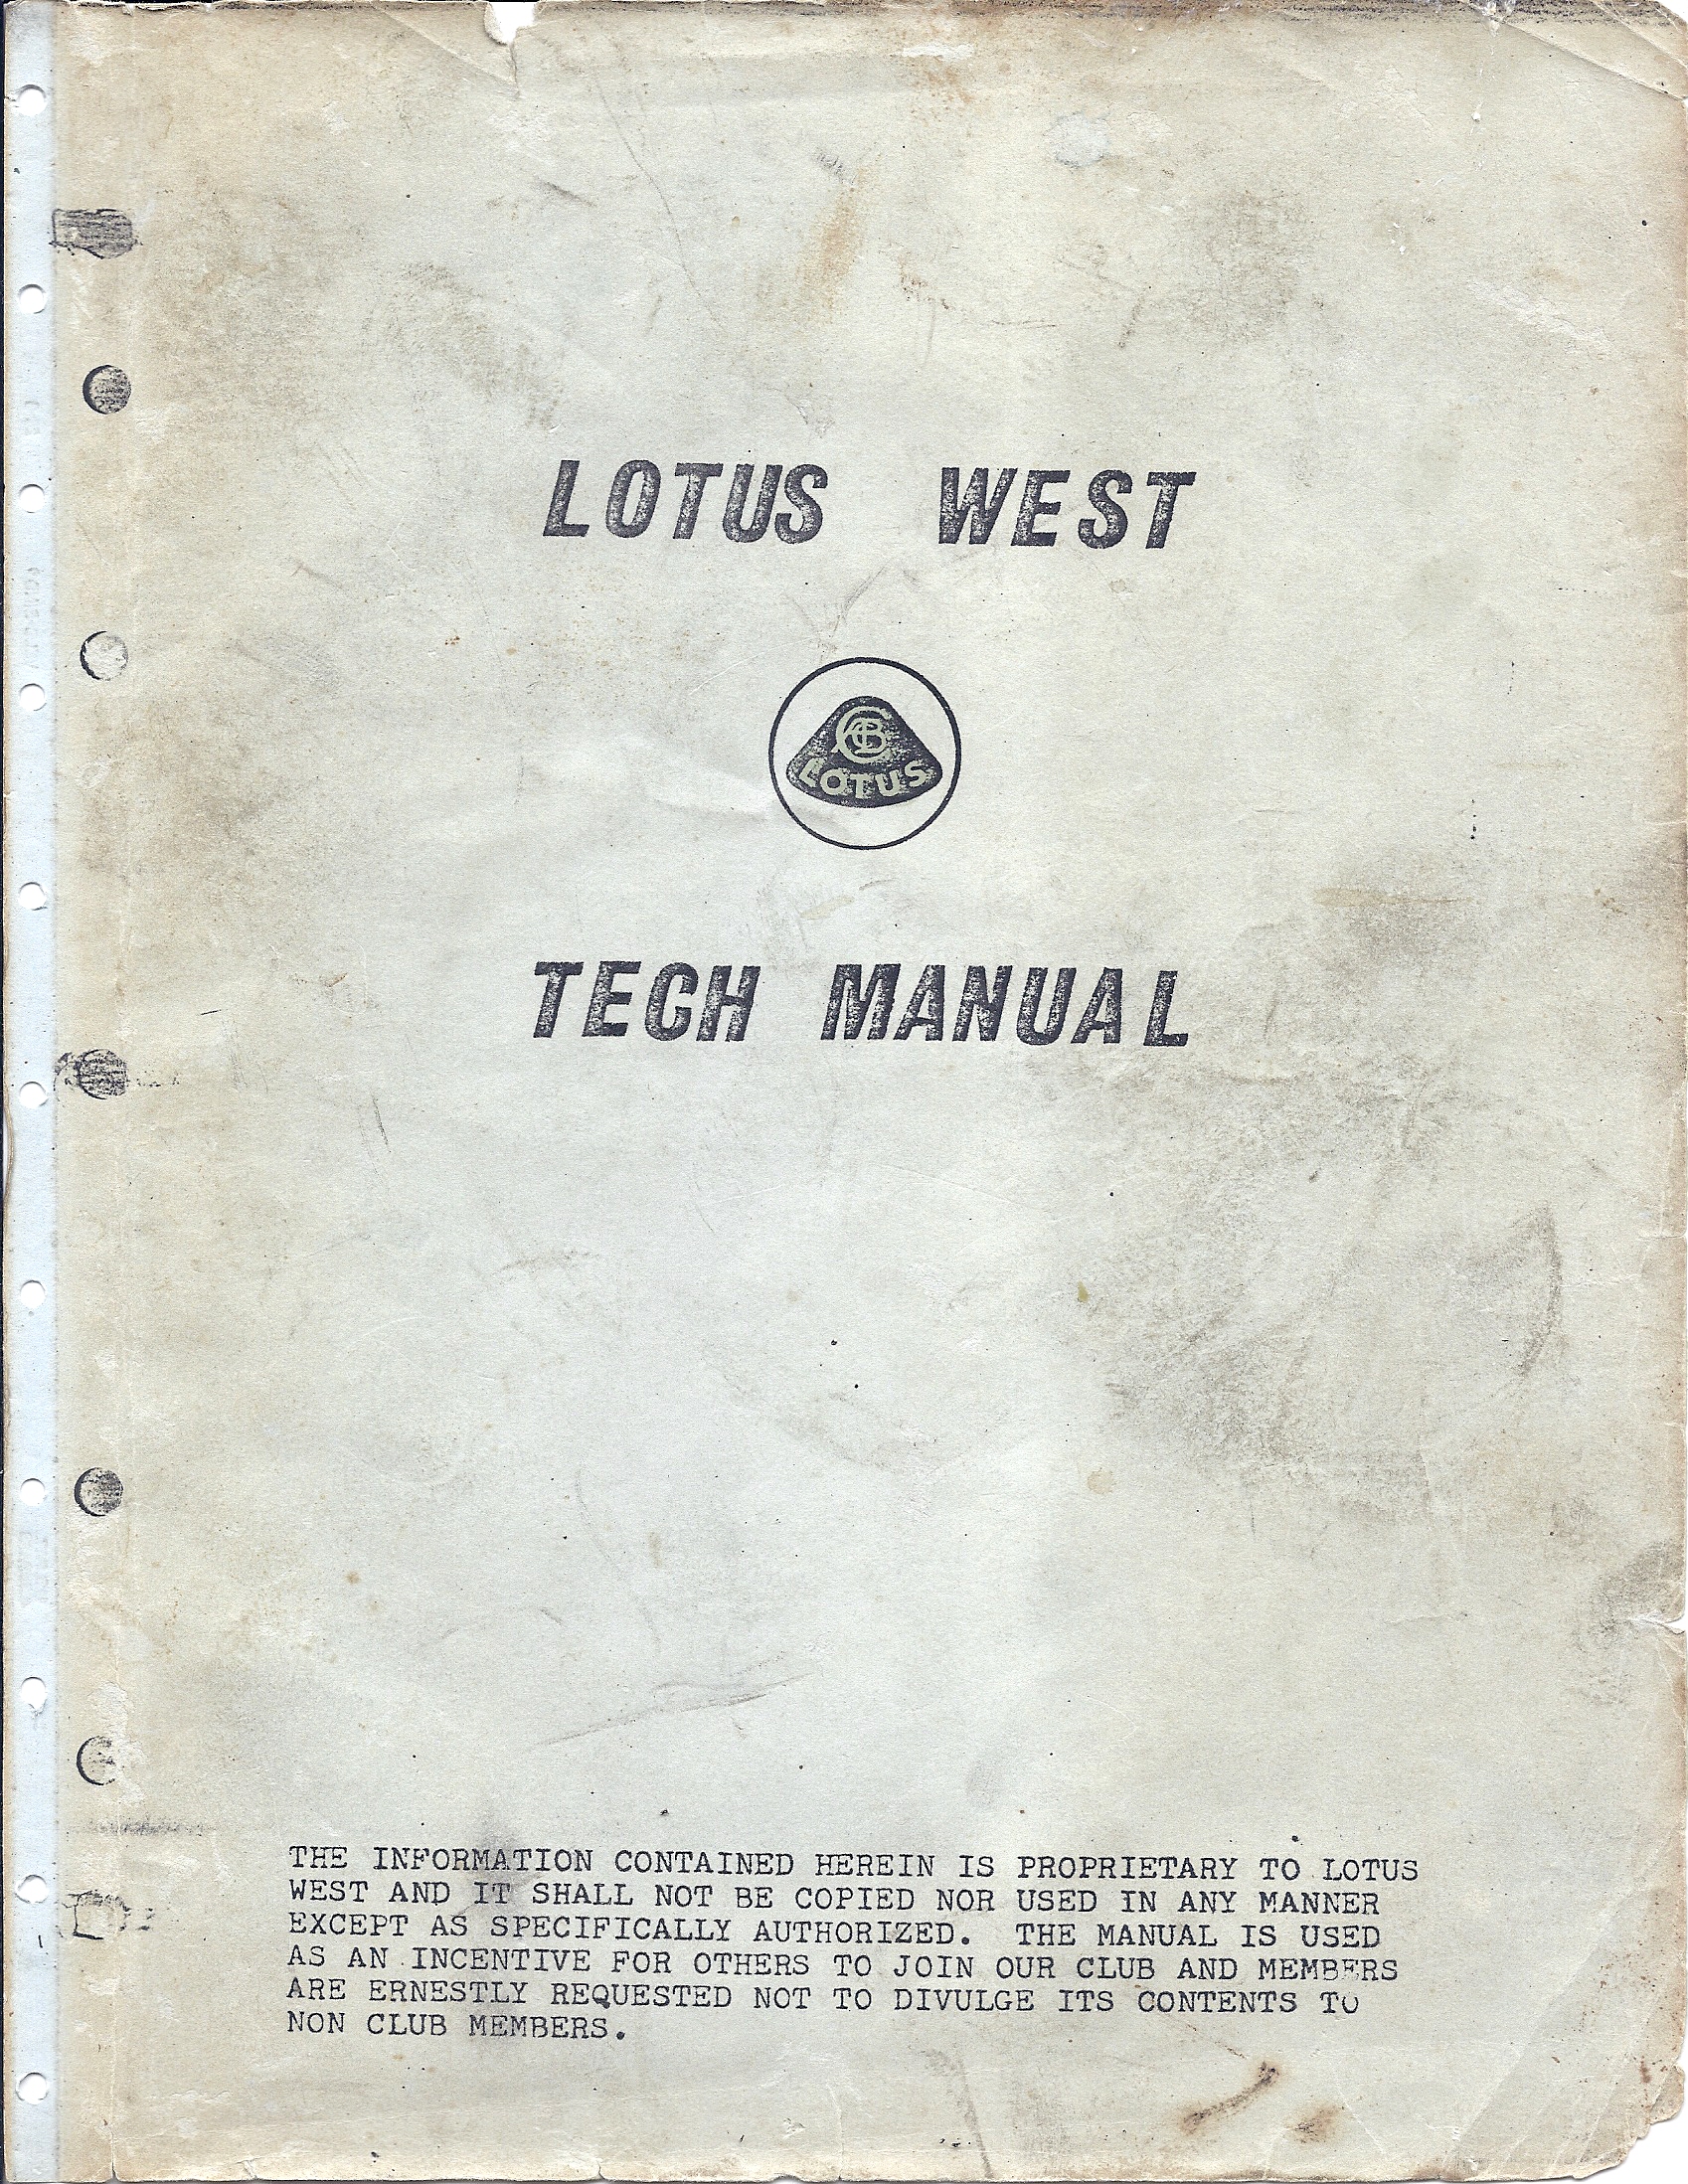 Lotus West Technical Manual